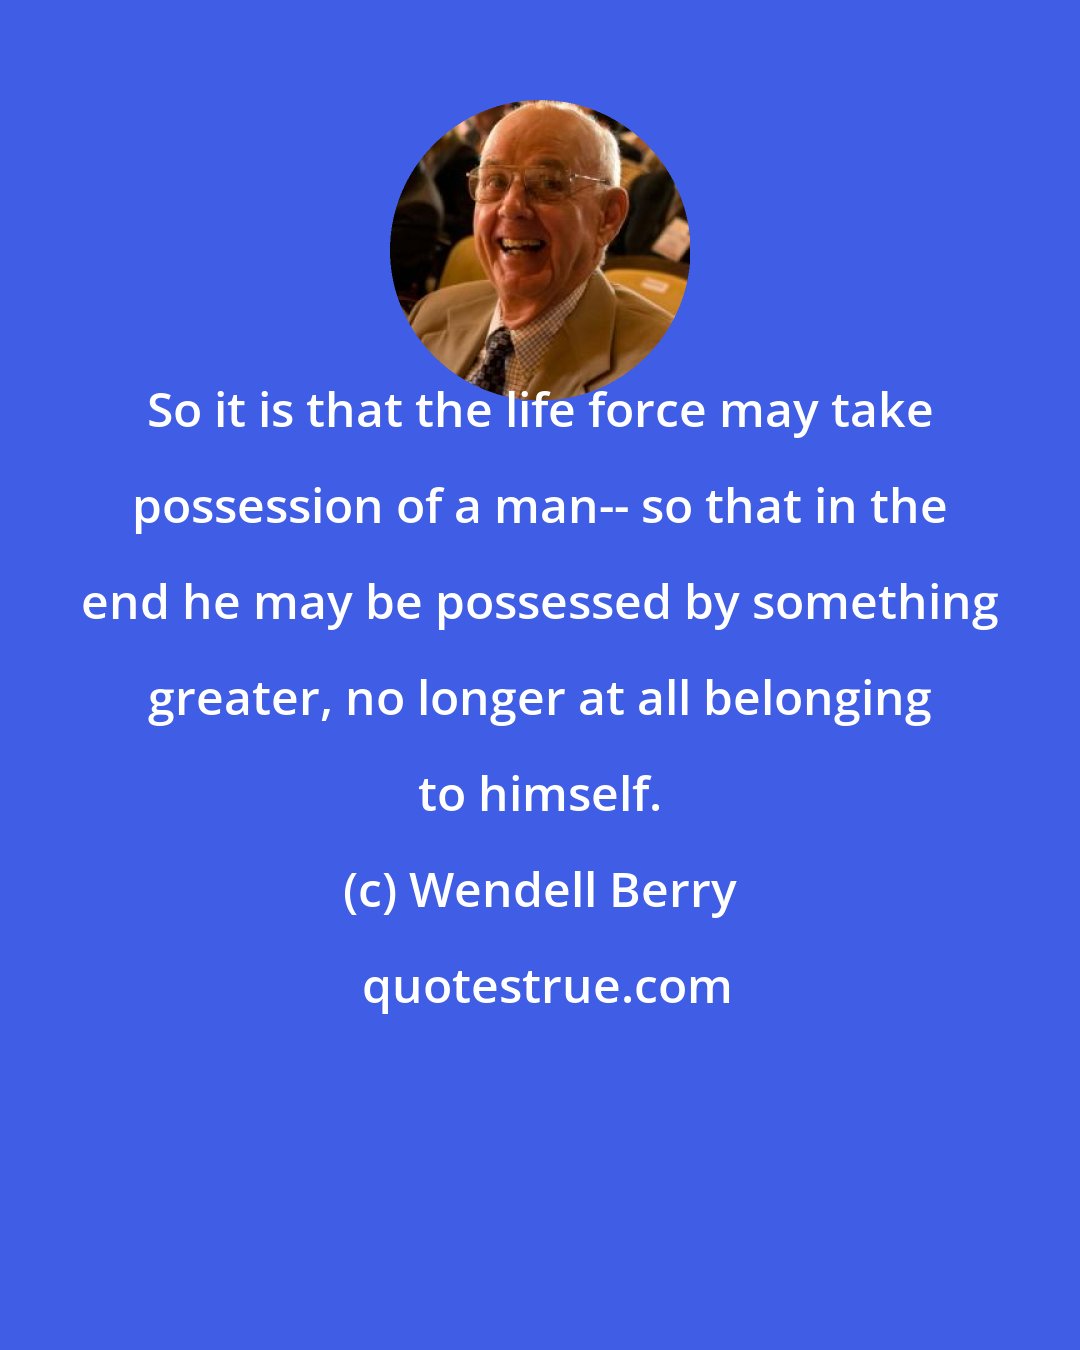 Wendell Berry: So it is that the life force may take possession of a man-- so that in the end he may be possessed by something greater, no longer at all belonging to himself.